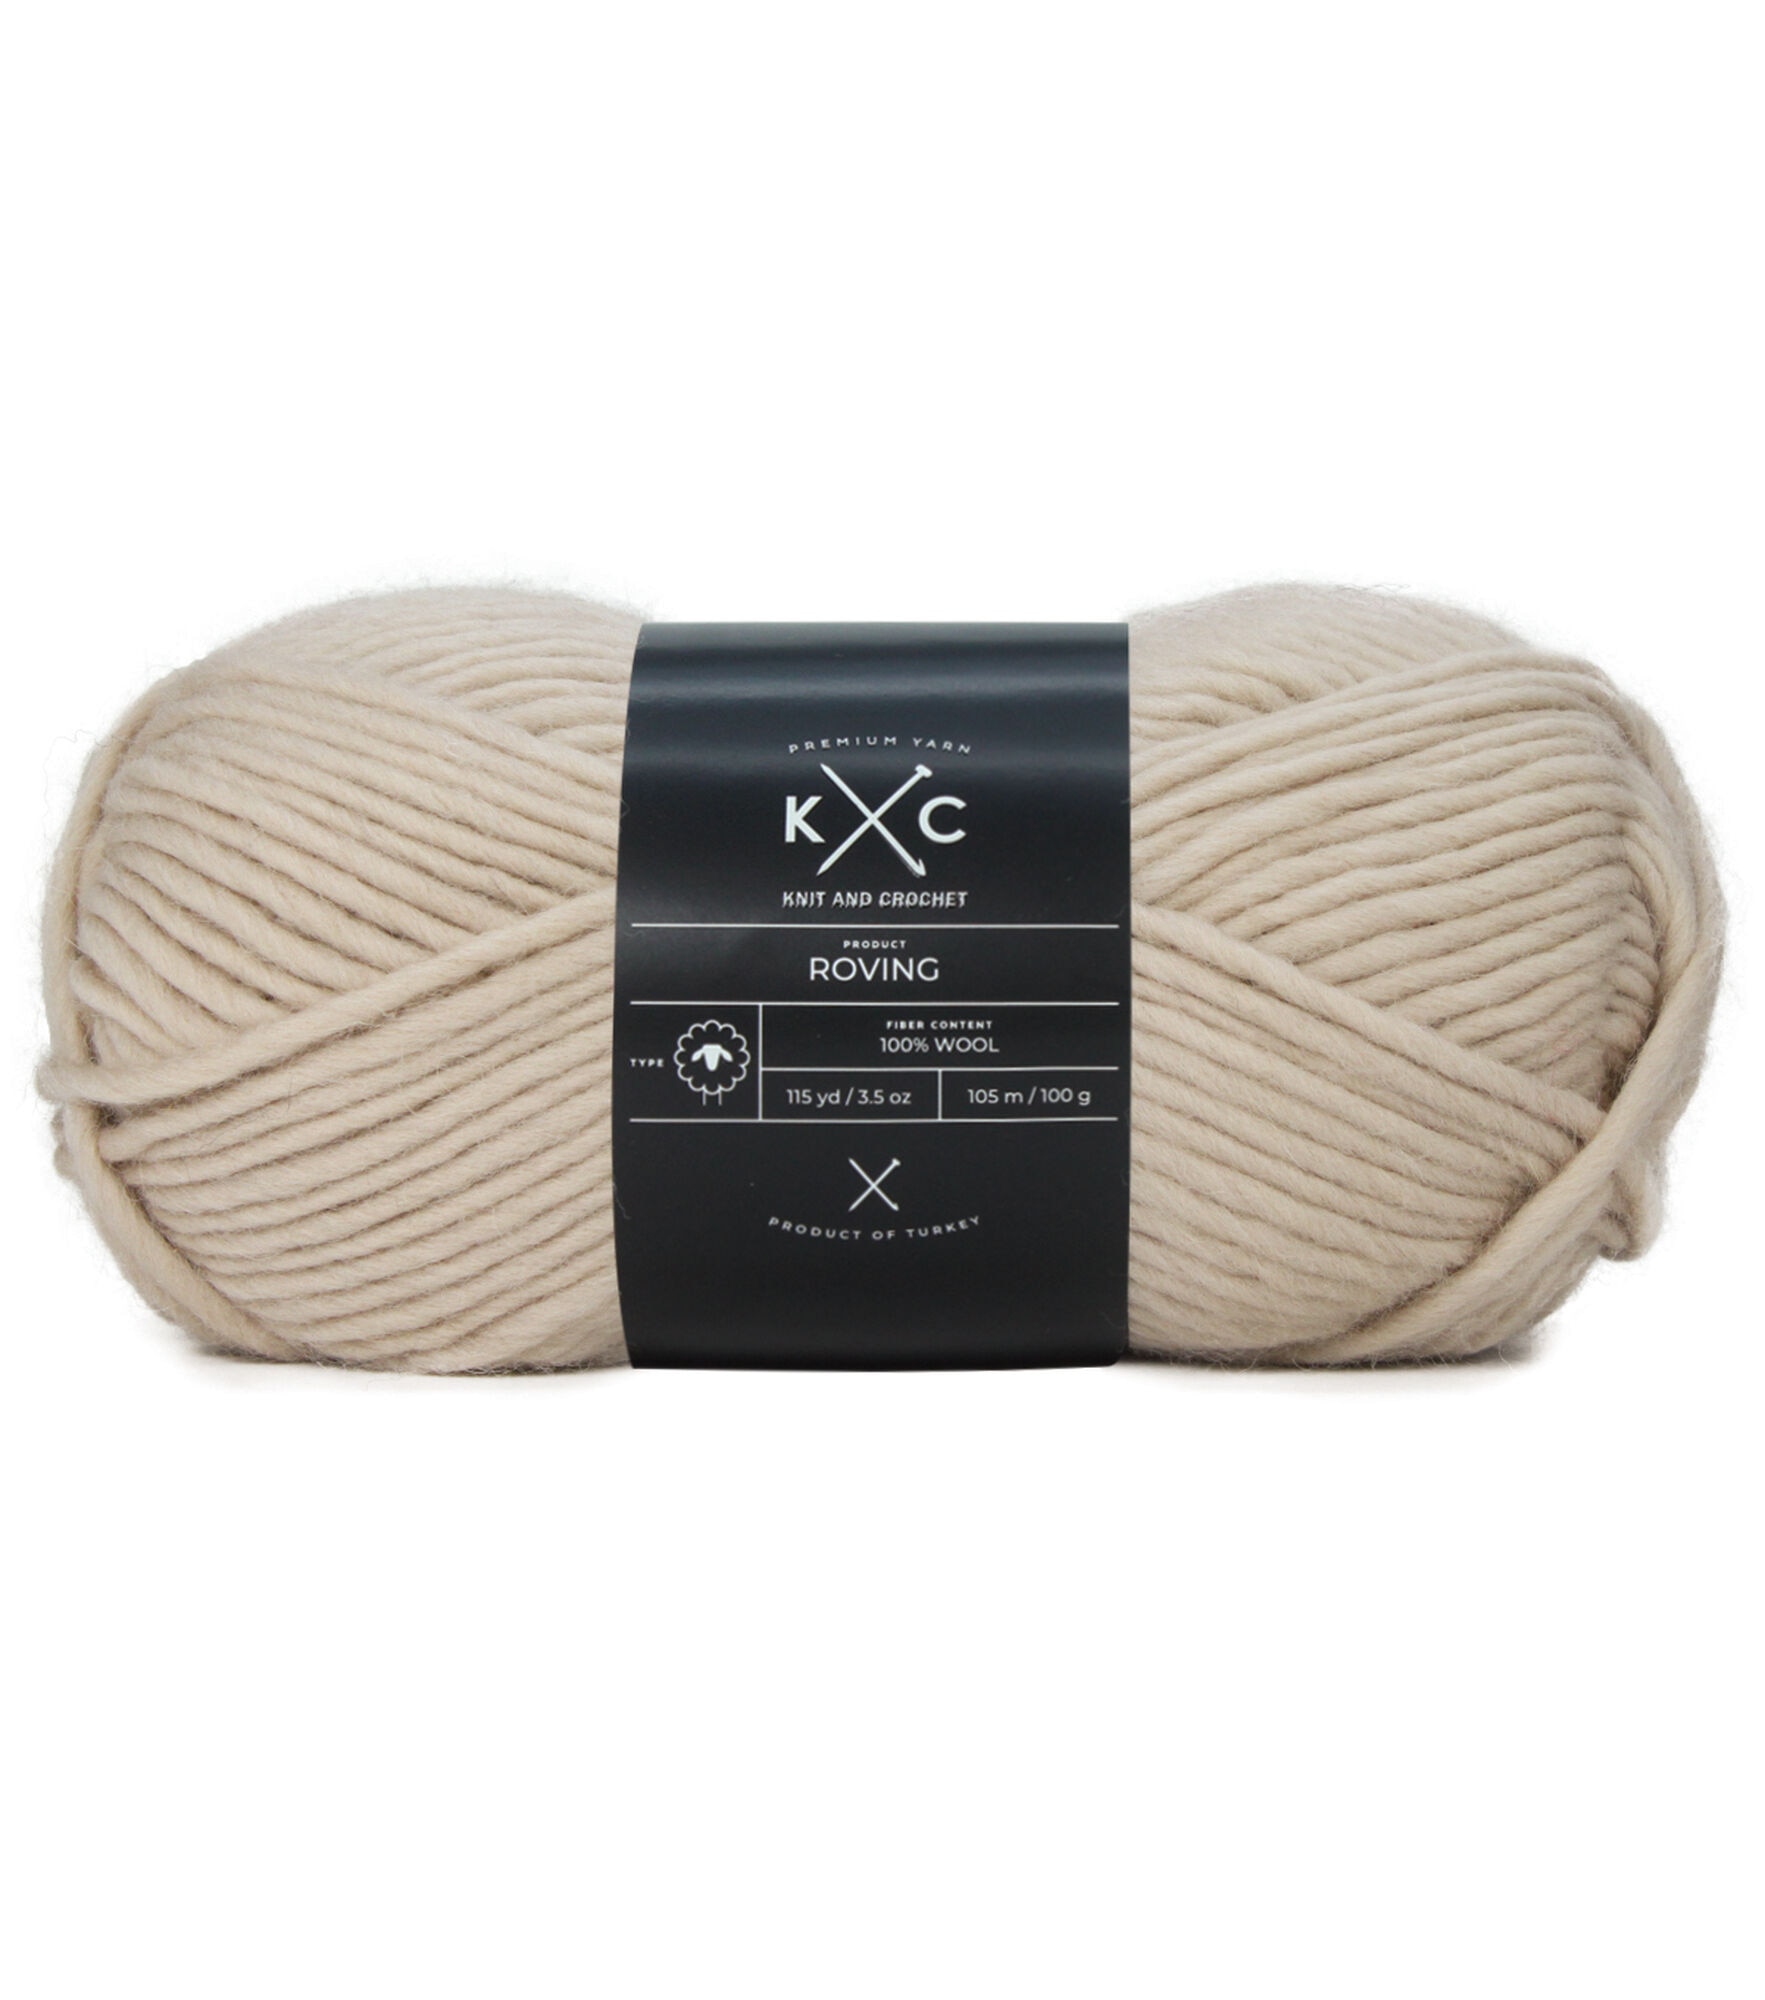 Super Bulky Weight Yarn – Wooden SpoolsQuilting, Knitting and More!